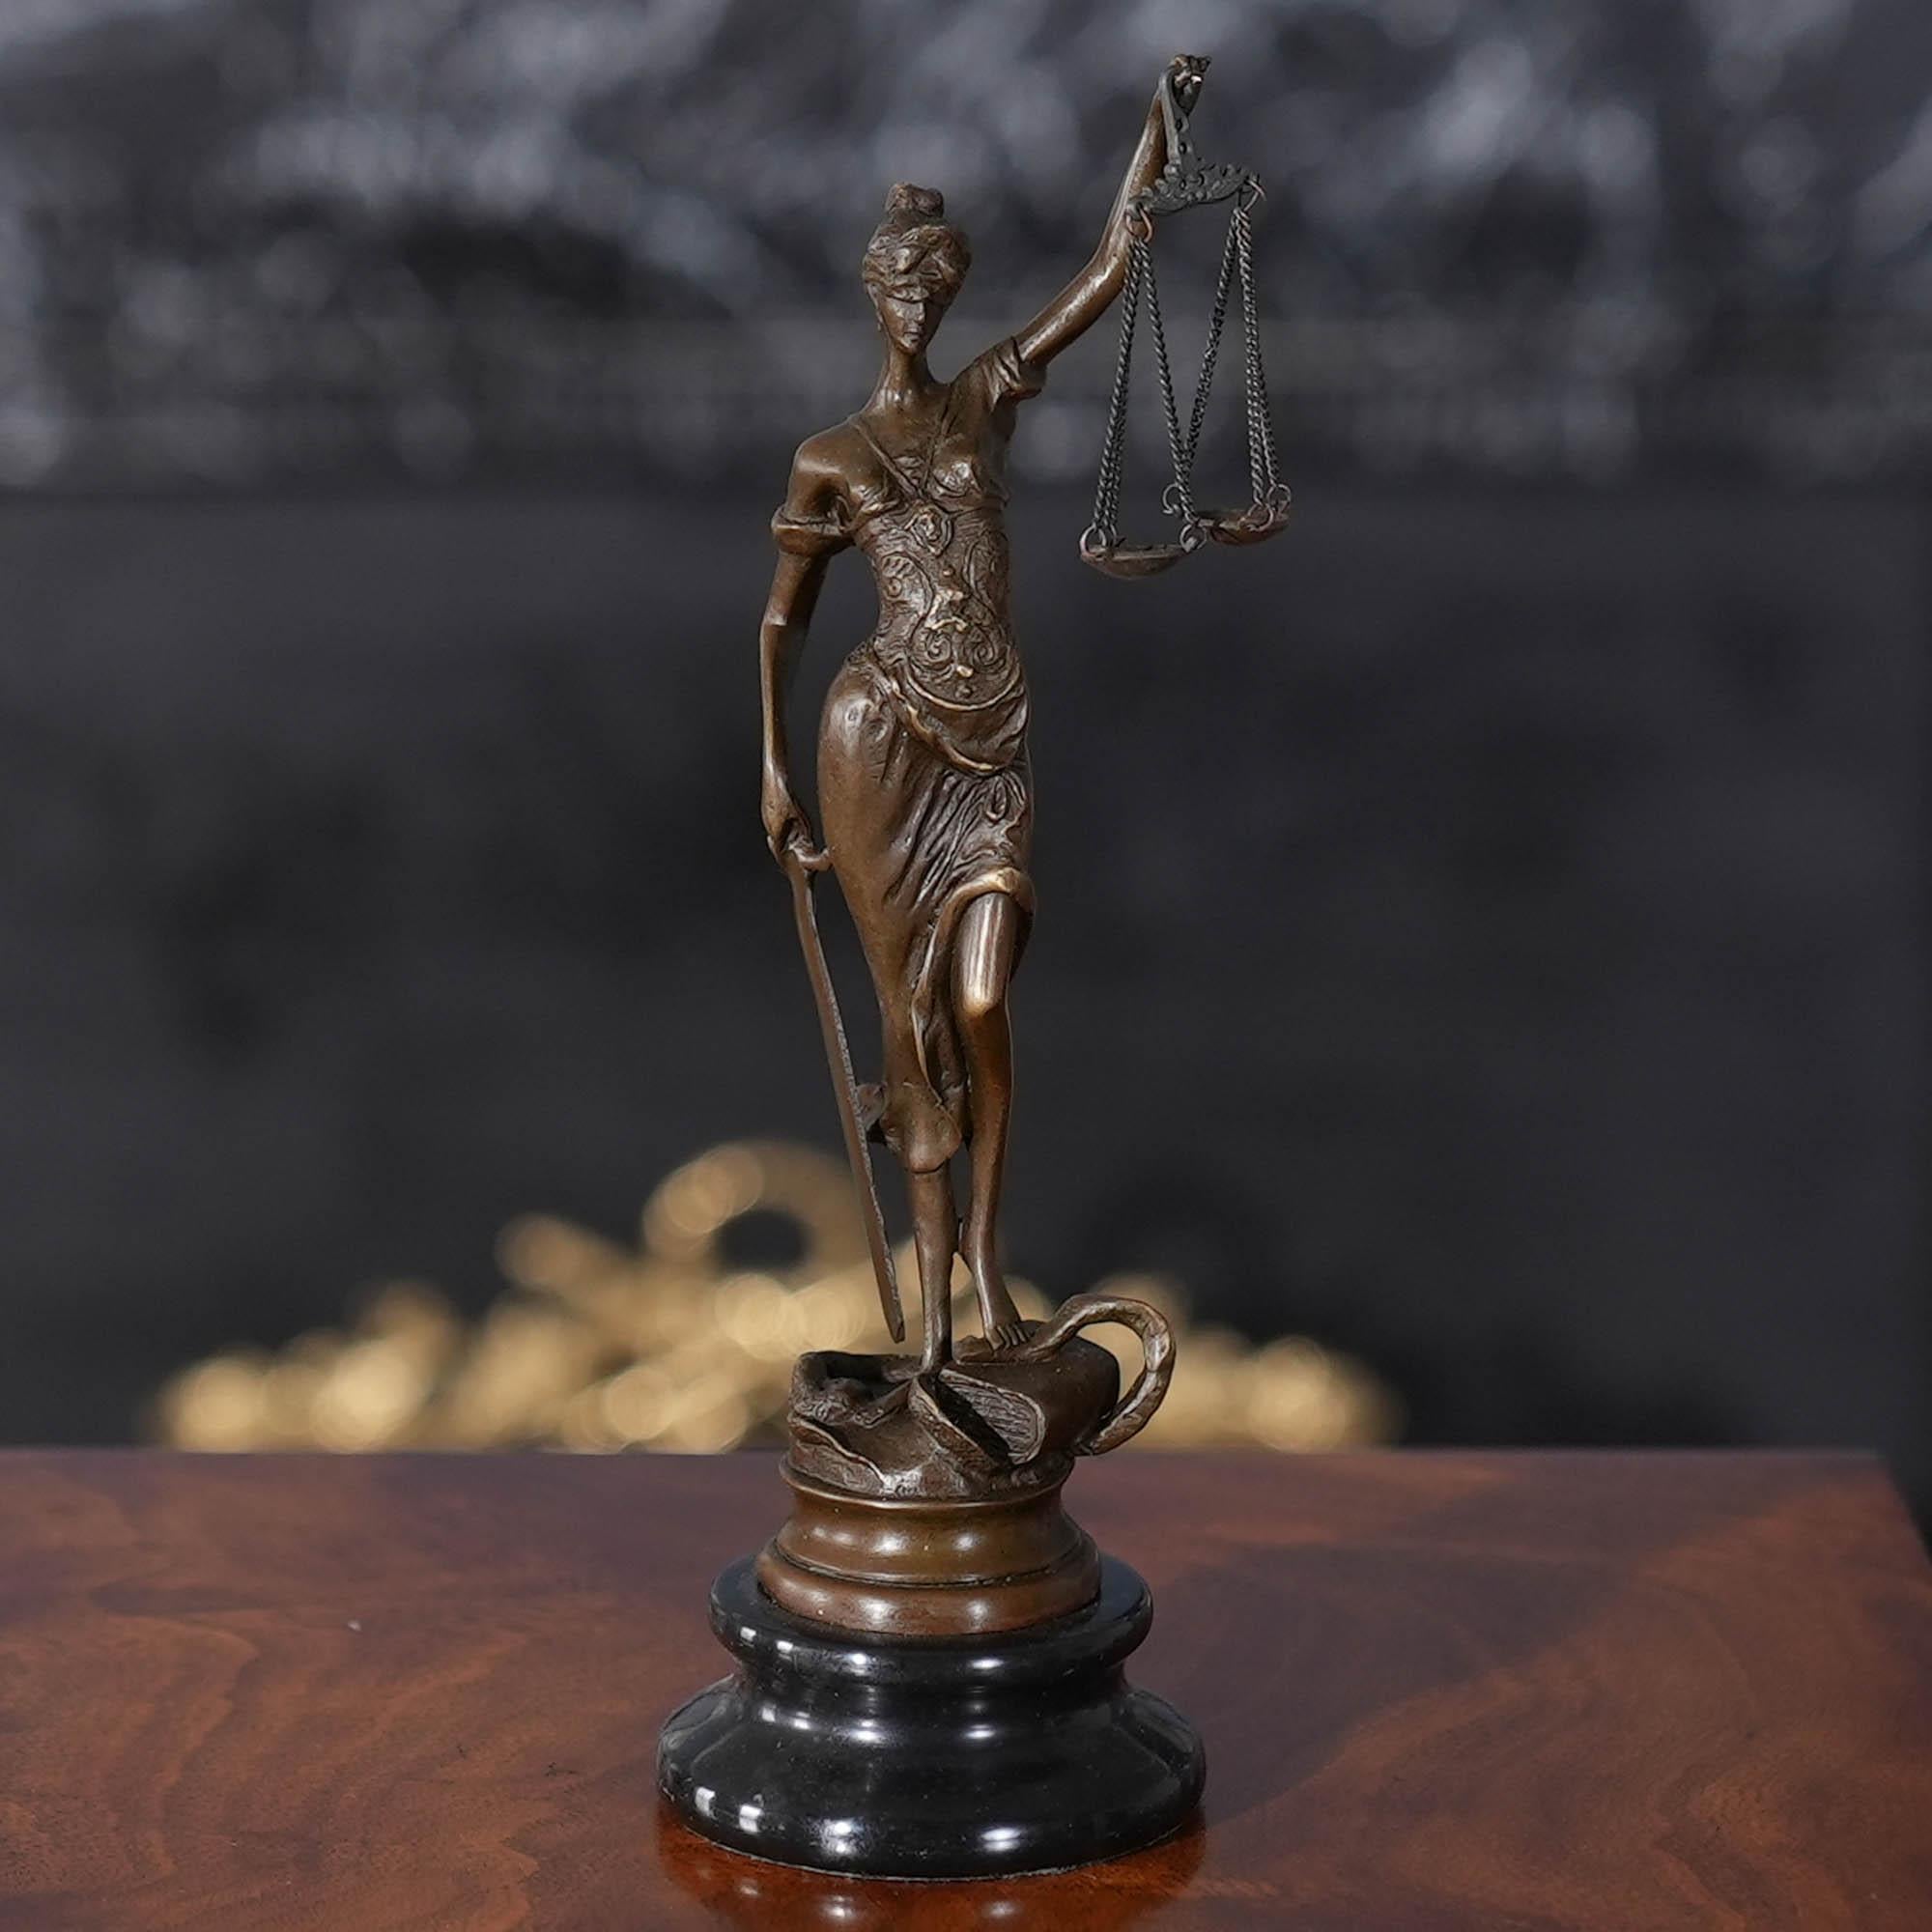 Graceful even when standing still the Small Bronze Justice with Scales on Marble Base is a striking addition to any setting. Using traditional lost wax casting methods the Bronze Justice statue has hand chaised details added to give a high level of